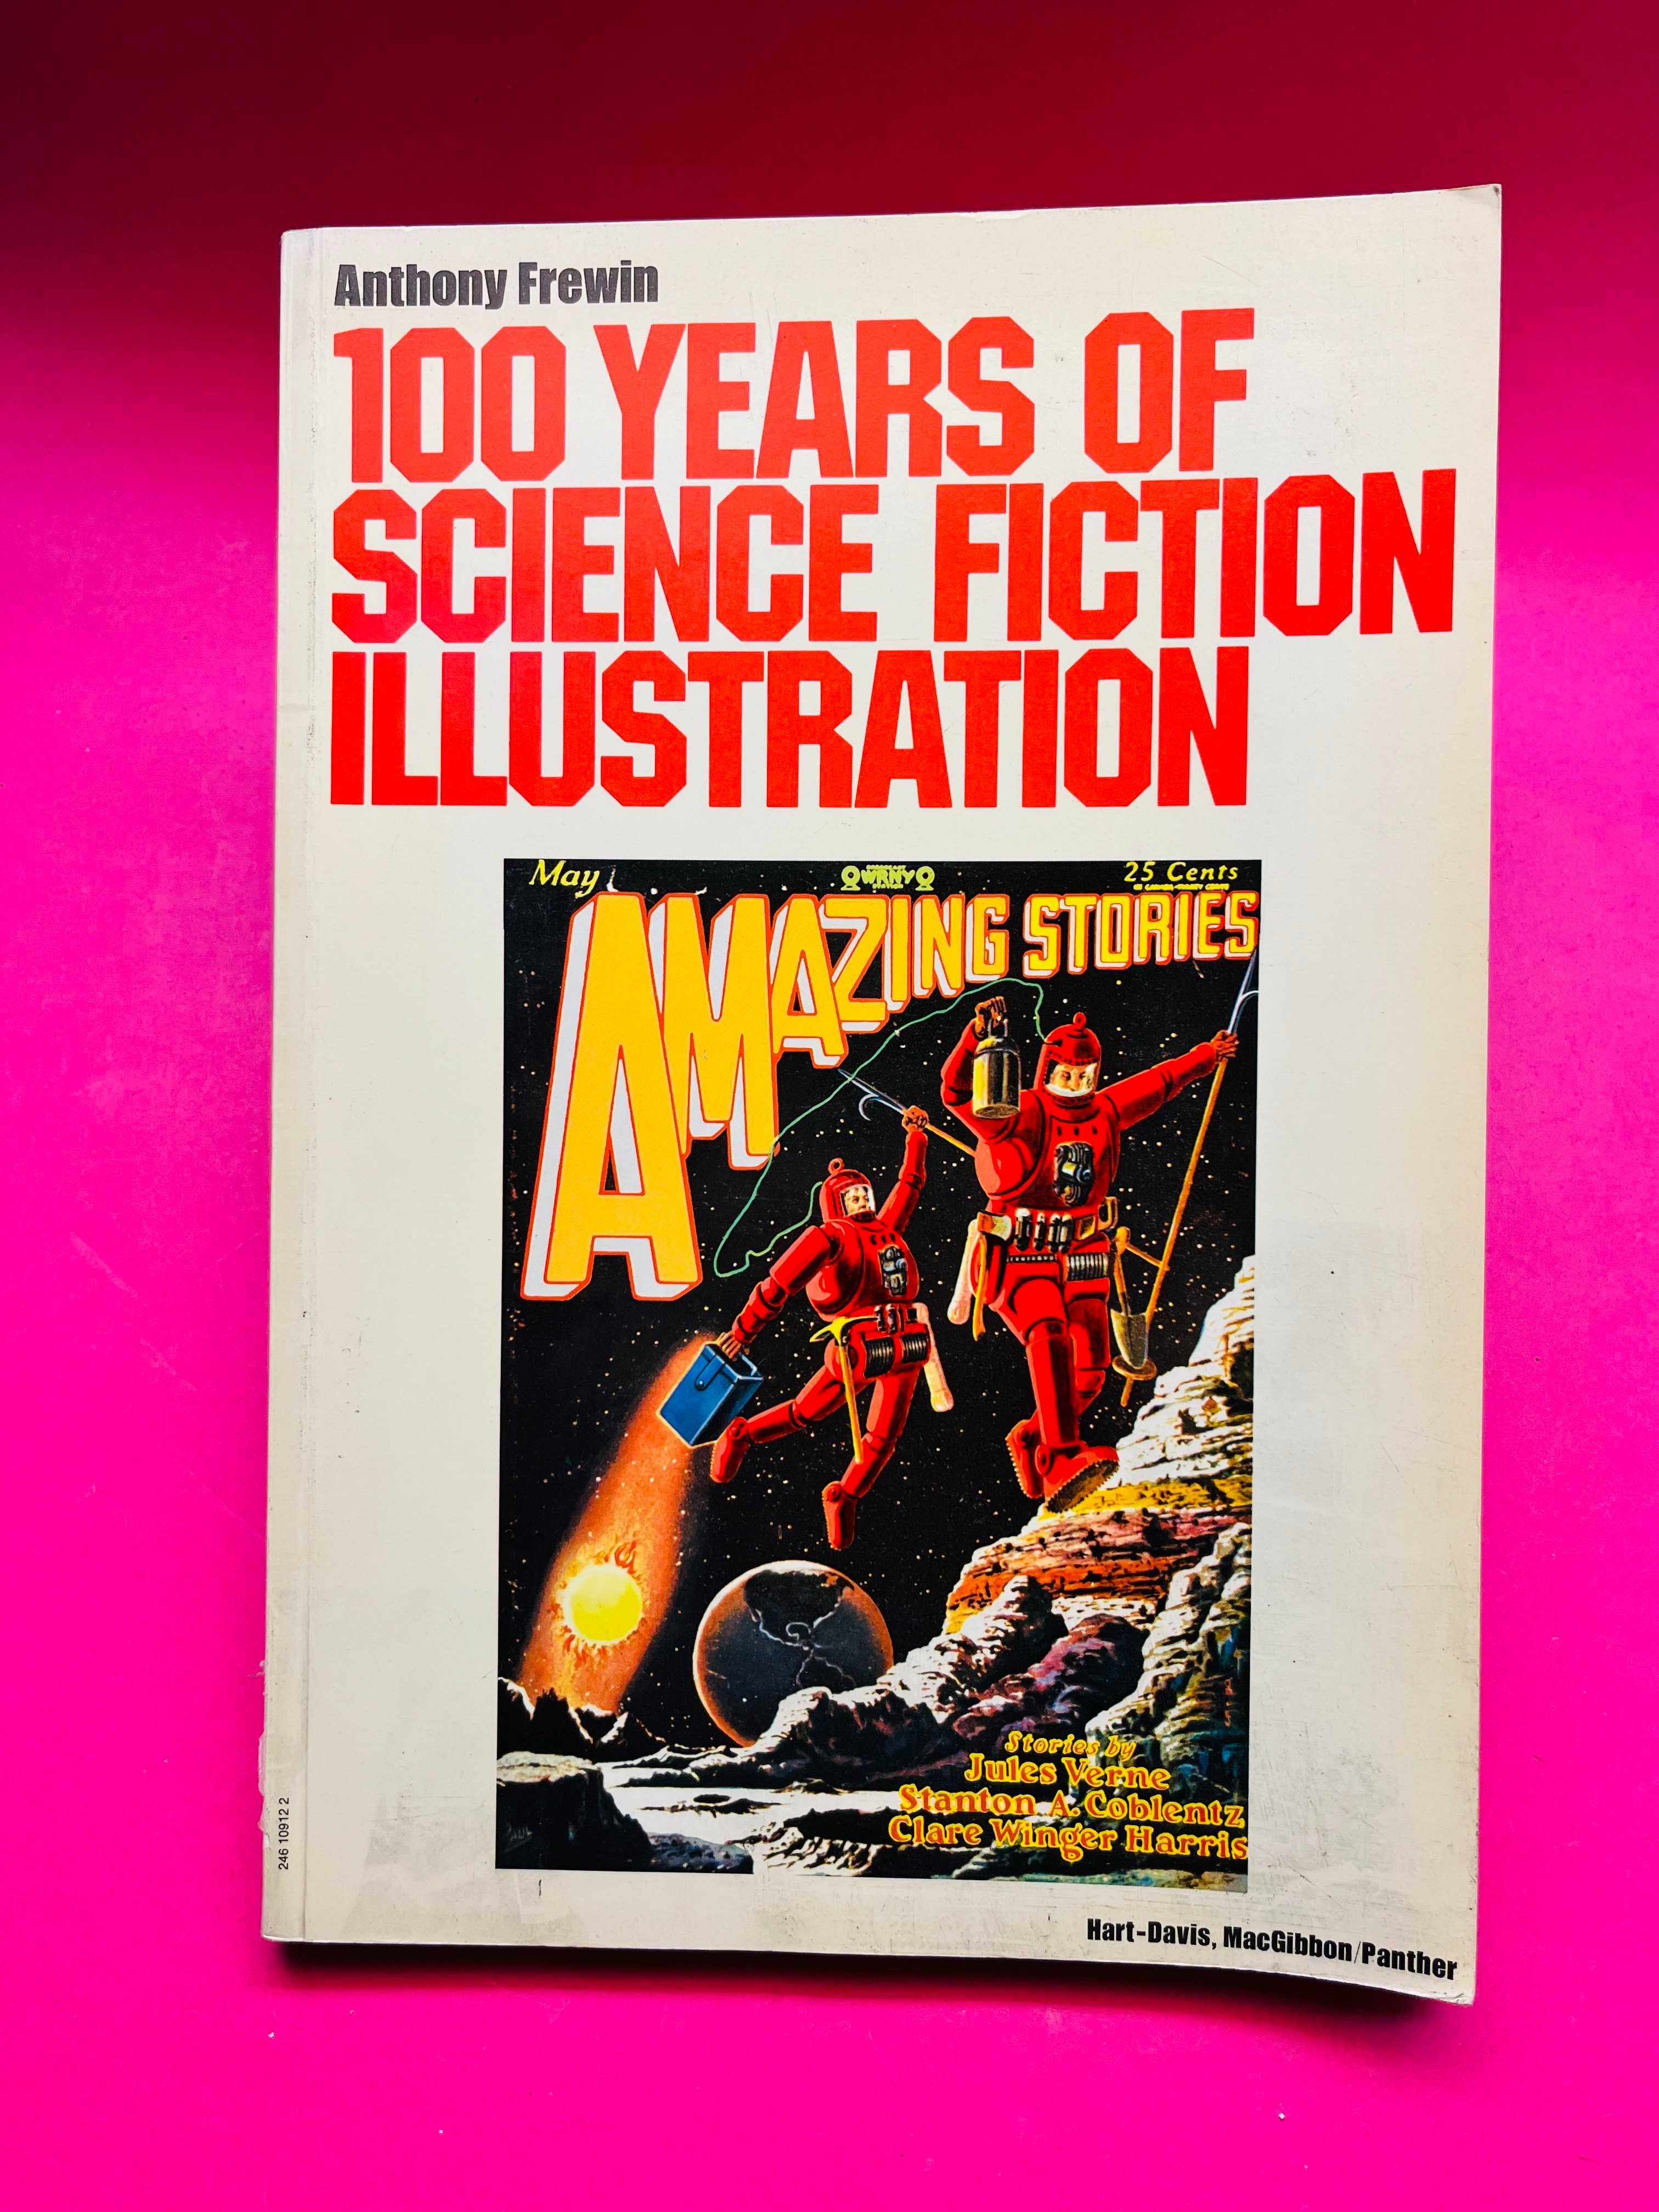 100 Years of Science Fiction Illustration - Anthony Frewin